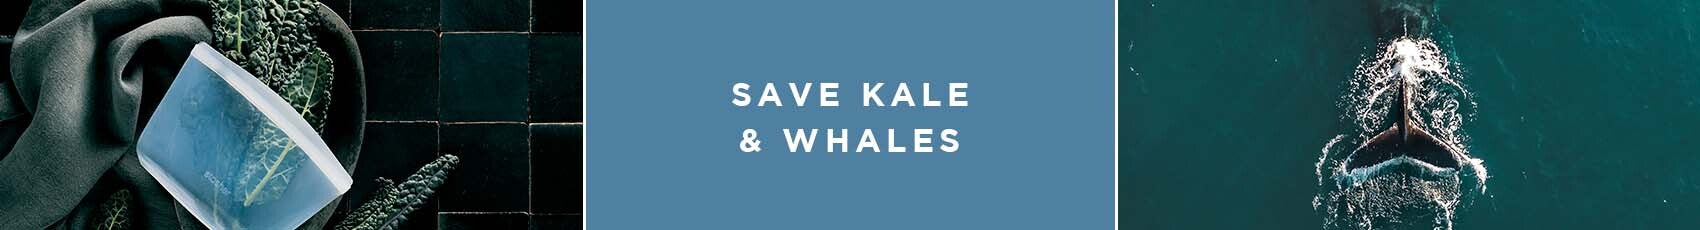 Save Kales, and Whales with Reusable Stasher Bags and Bowls.